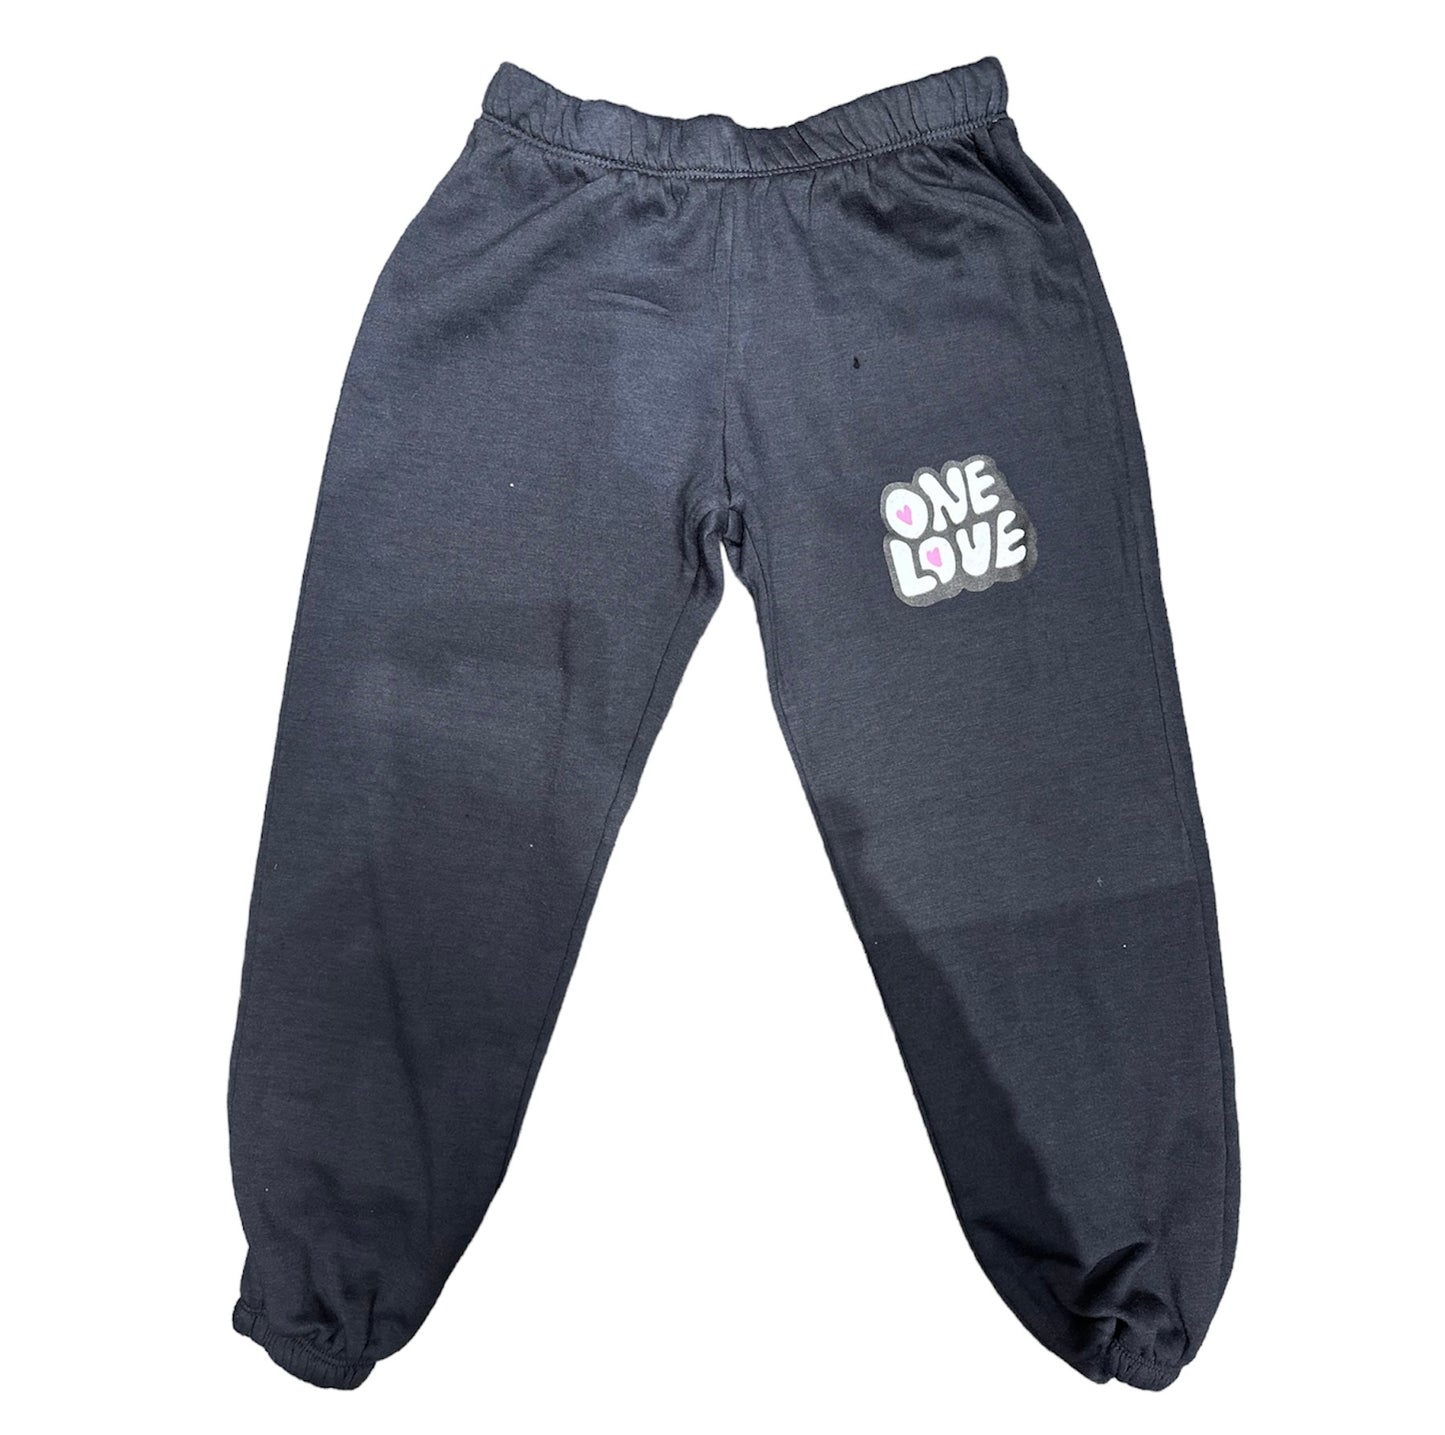 Firehouse One Love Jogger